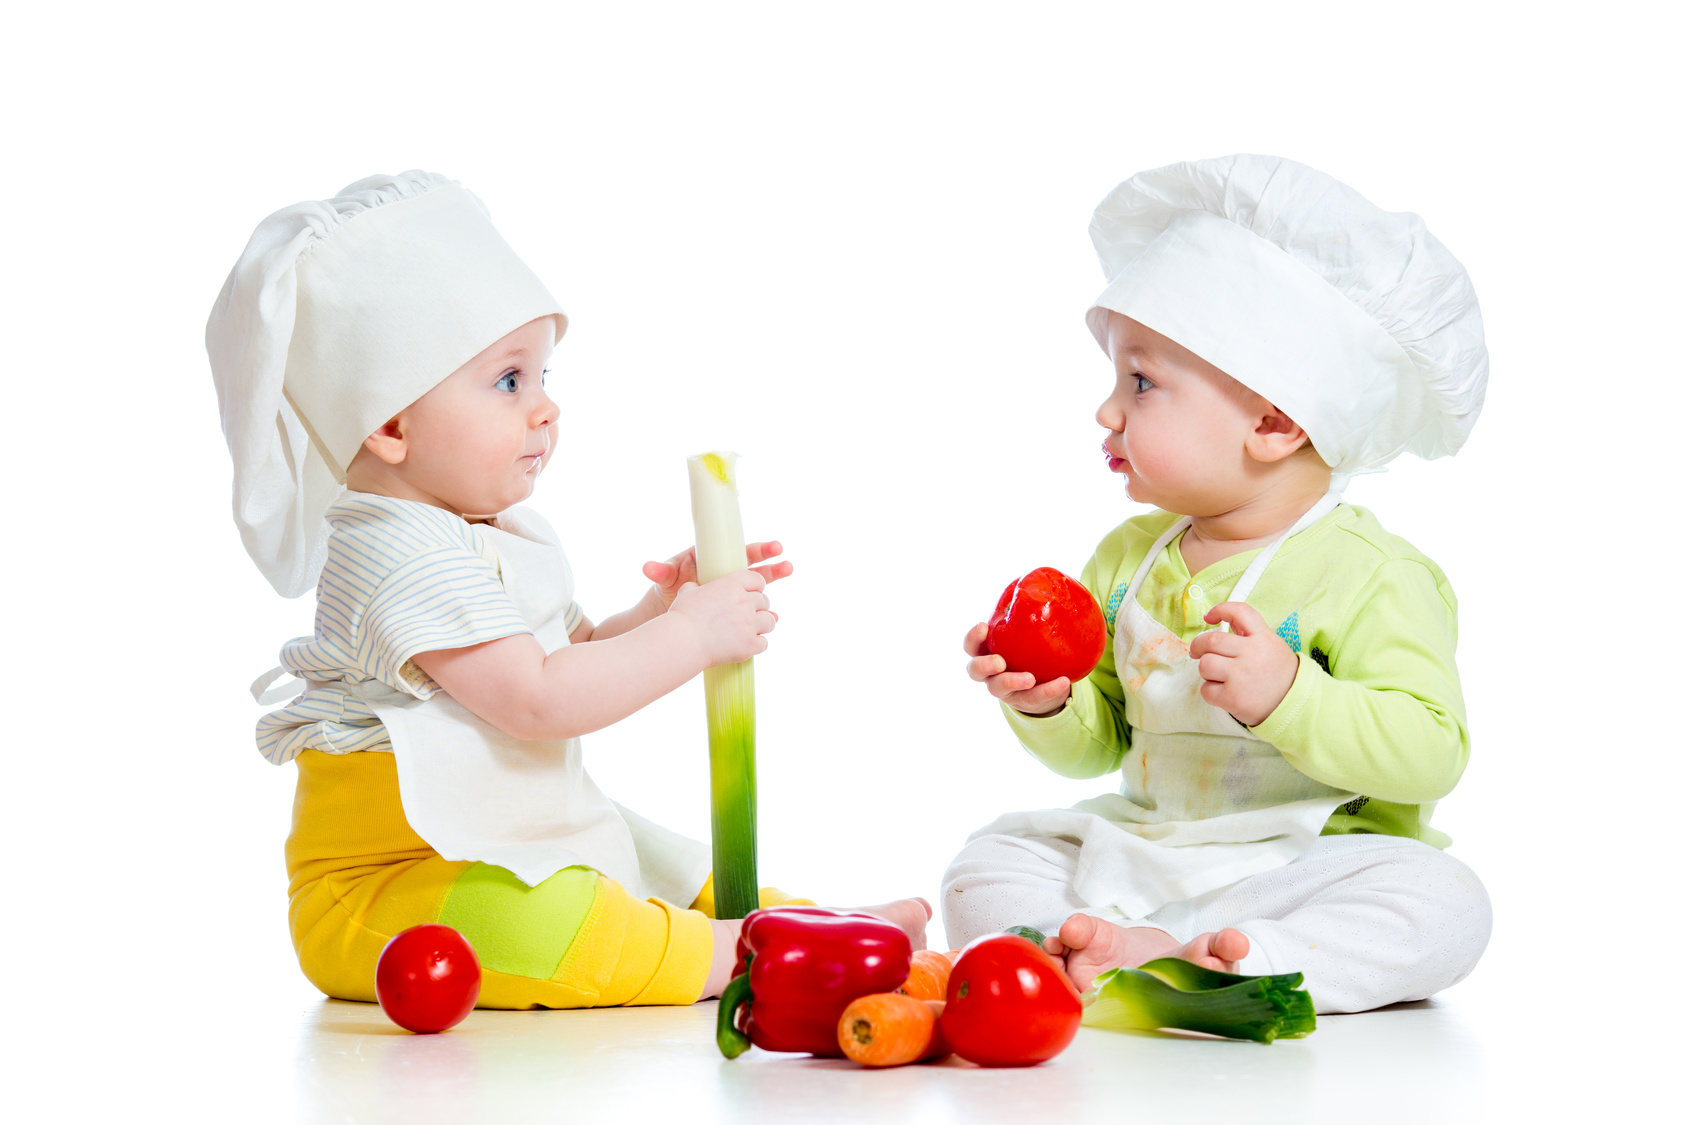 weaning foods, first foods for baby, weaning in lockdown, forzen foods for baby